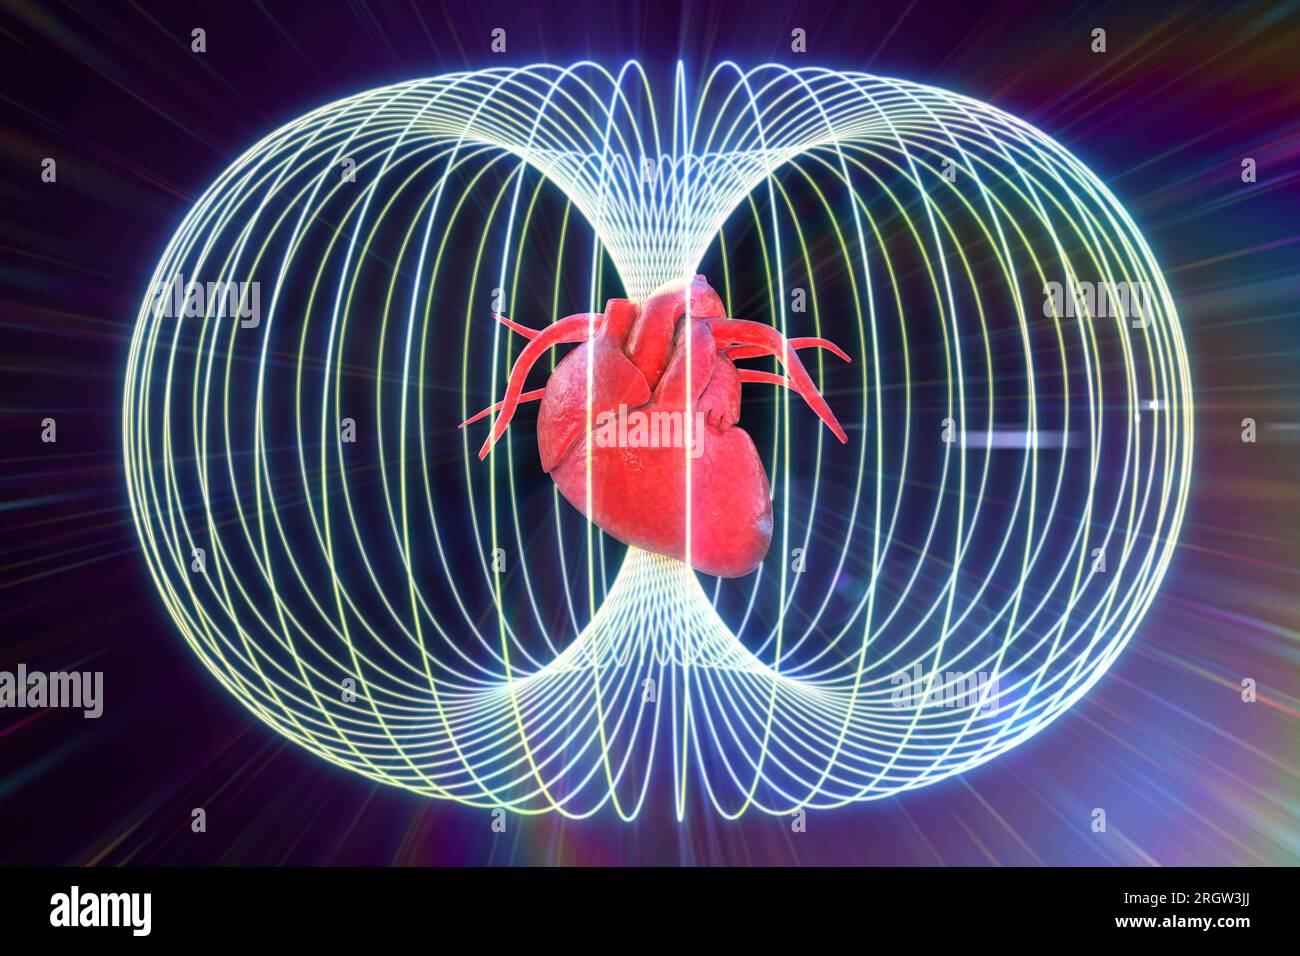 Heart in energy field, conceptual illustration Stock Photo